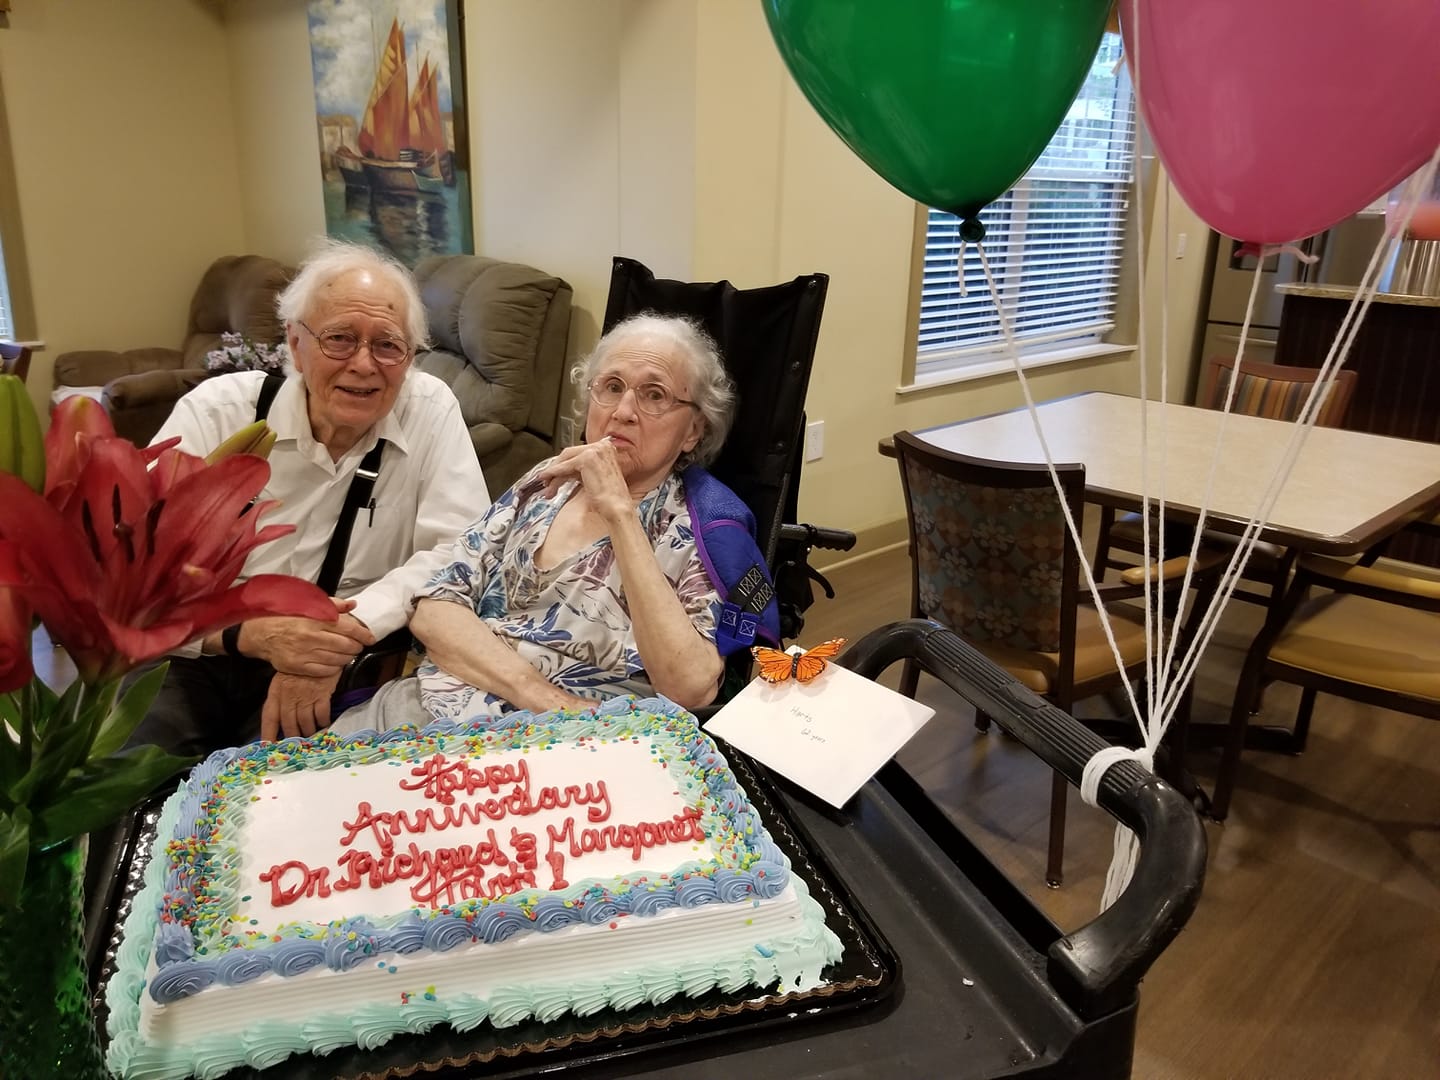 Dr. Hart and his wife Margaret with a birthday cake